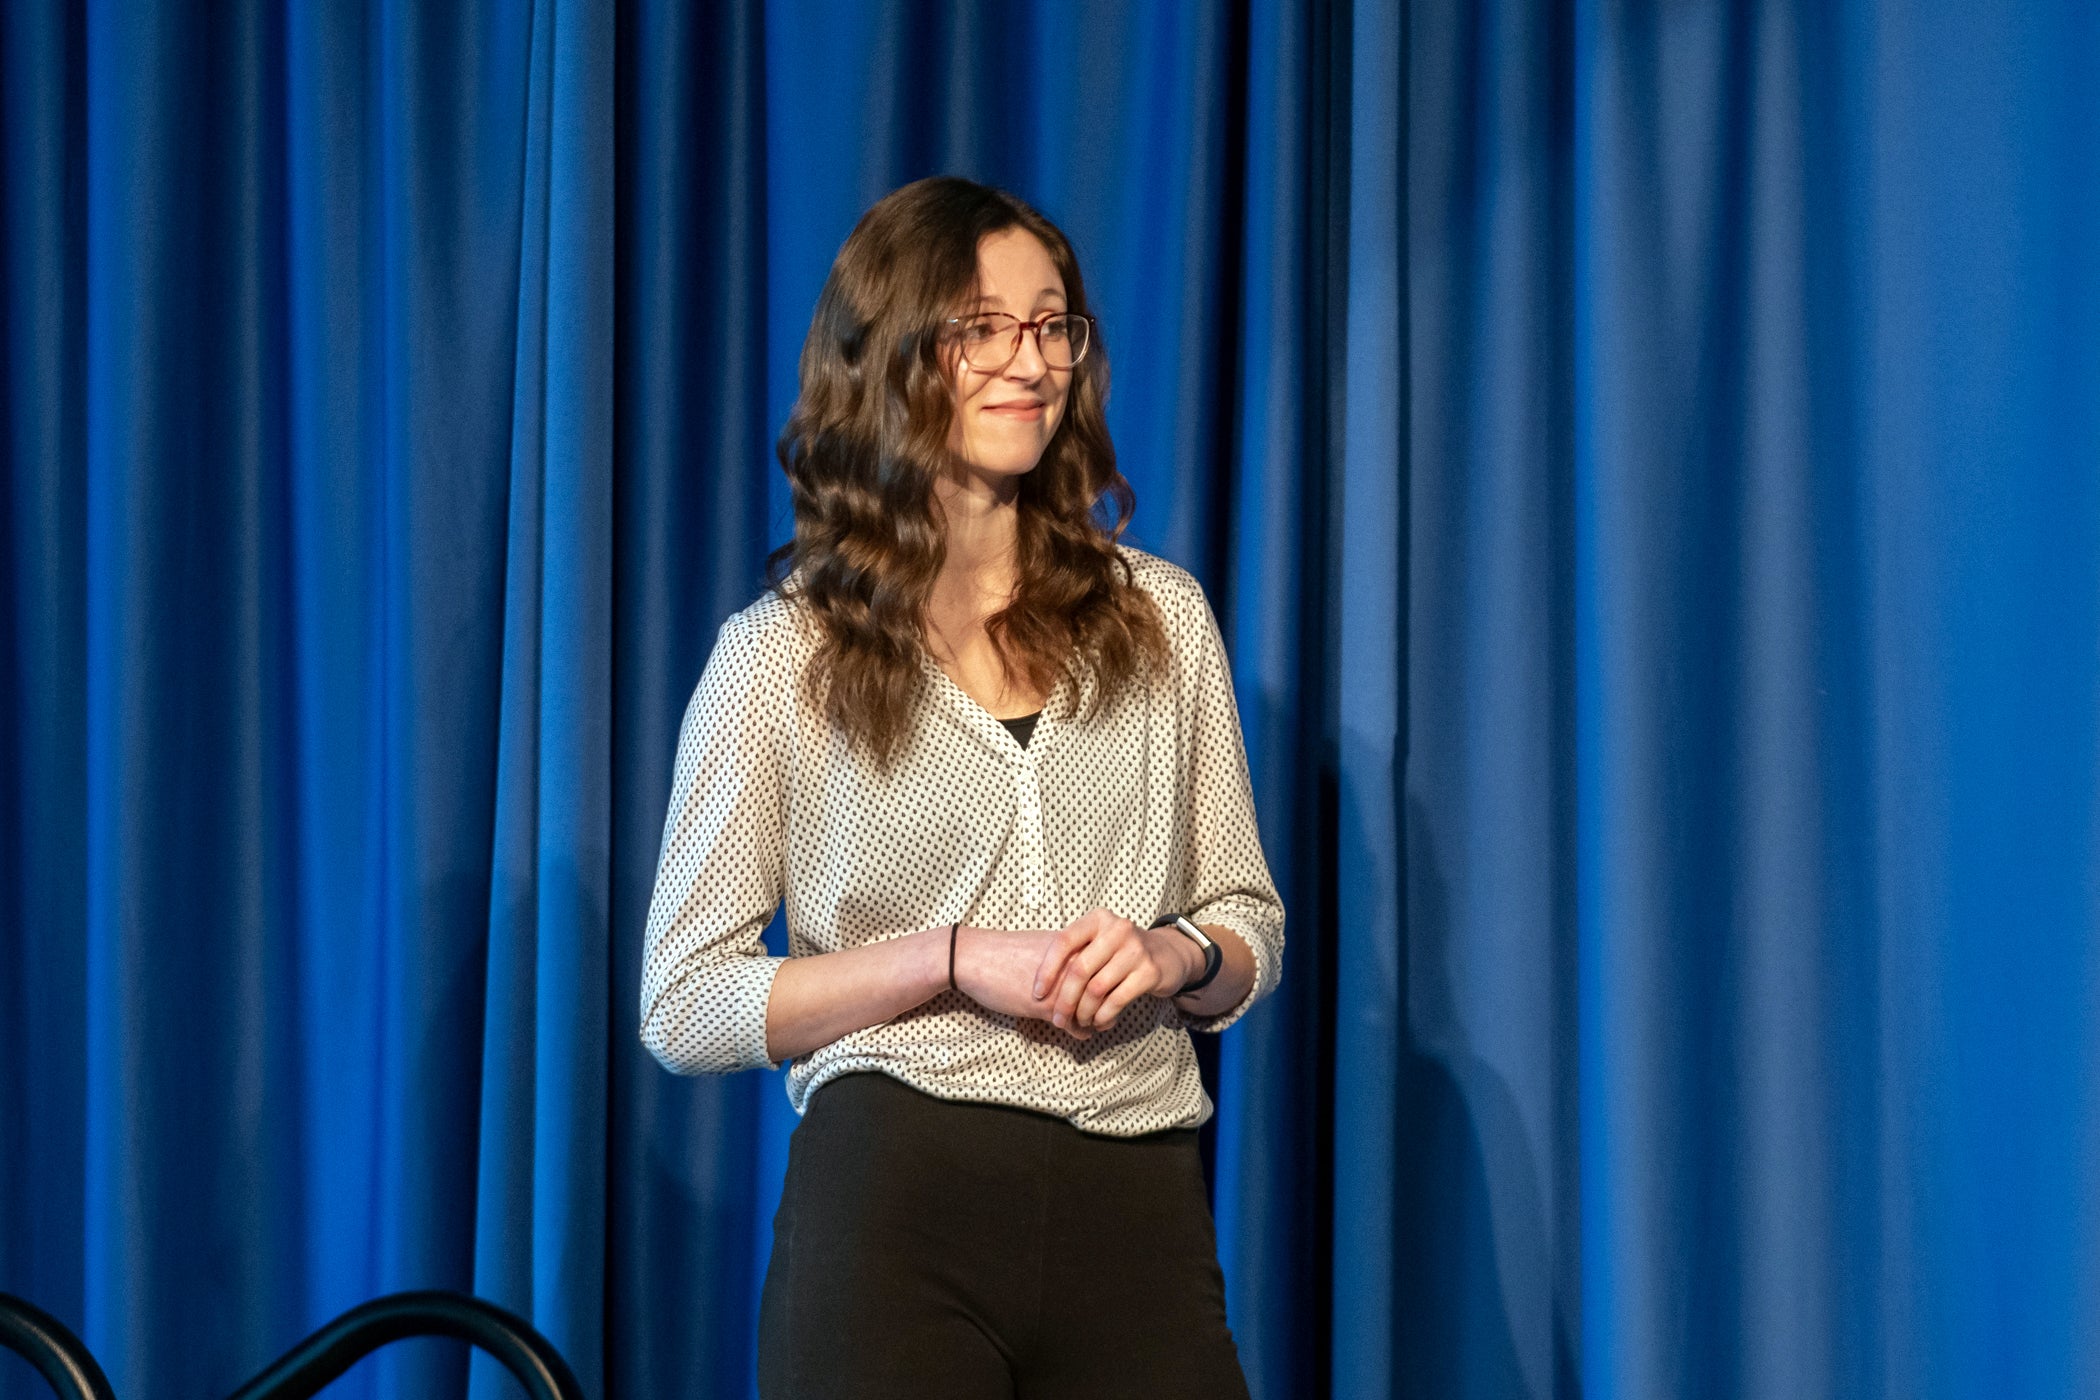 Rachel Phinney at 3MT Competition 